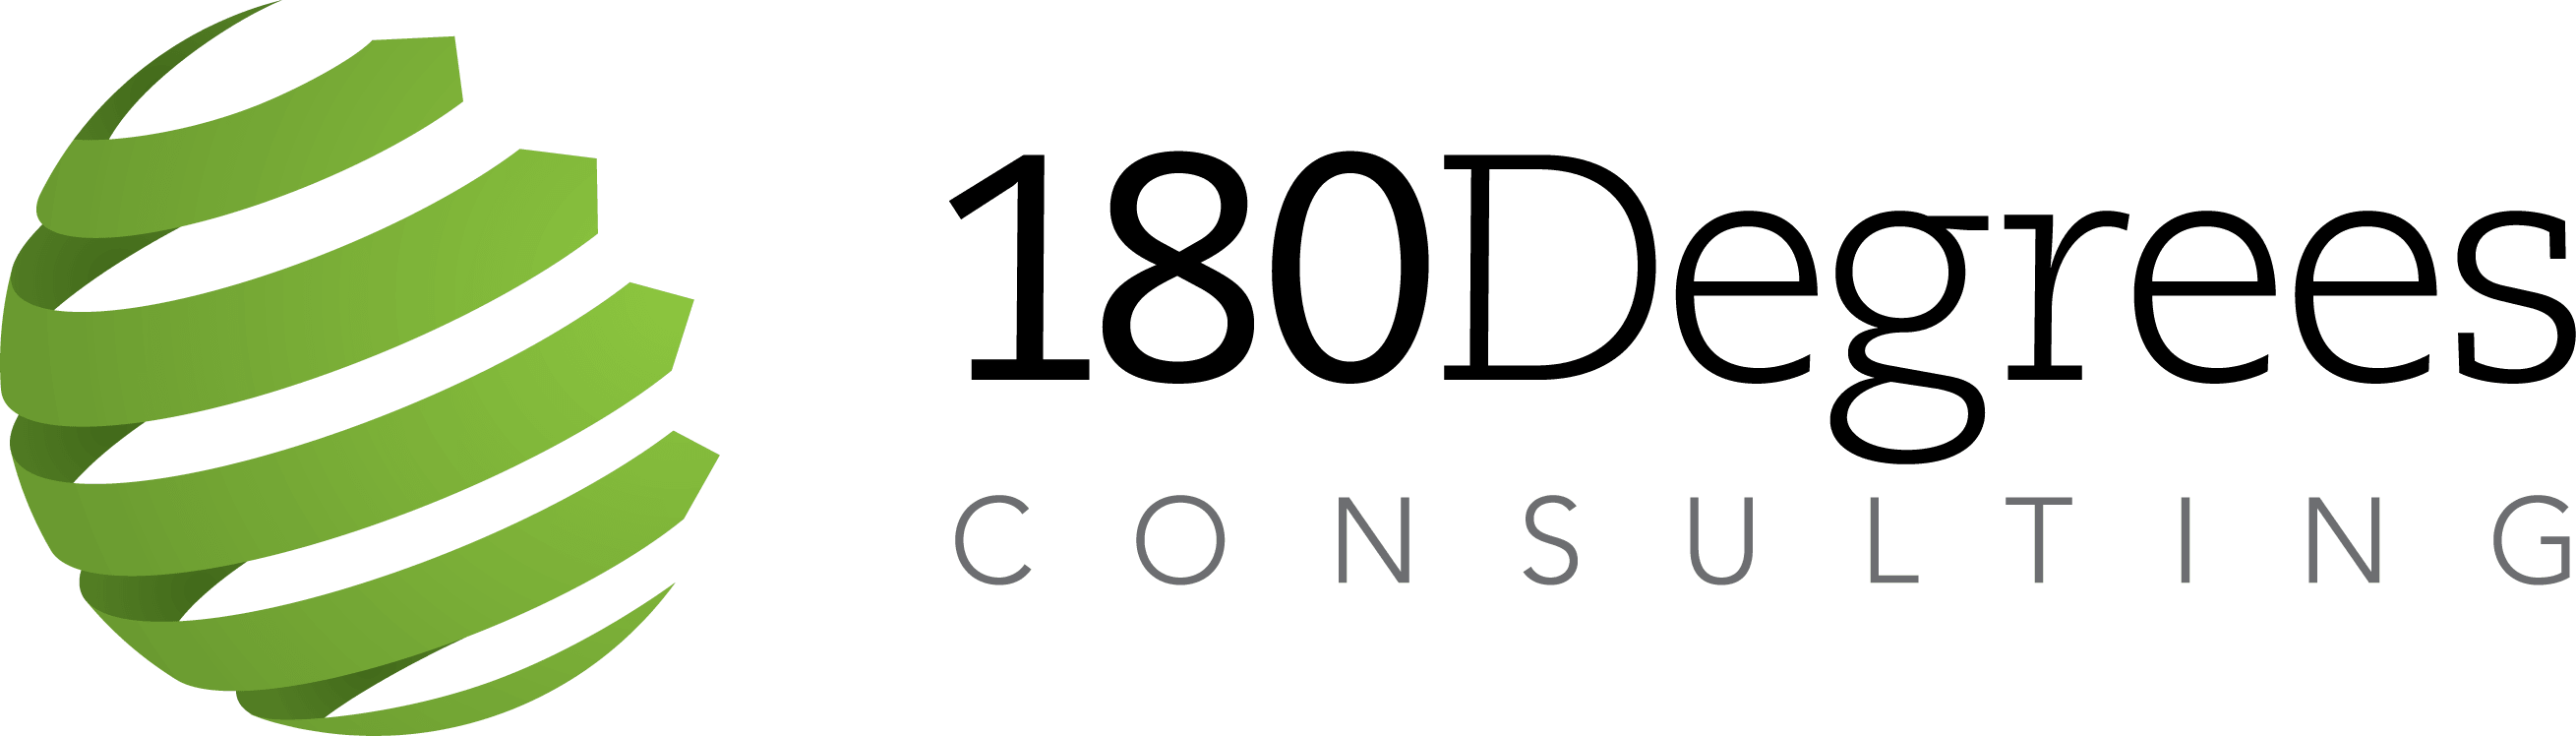 180 Degrees Consulting Munich-logo